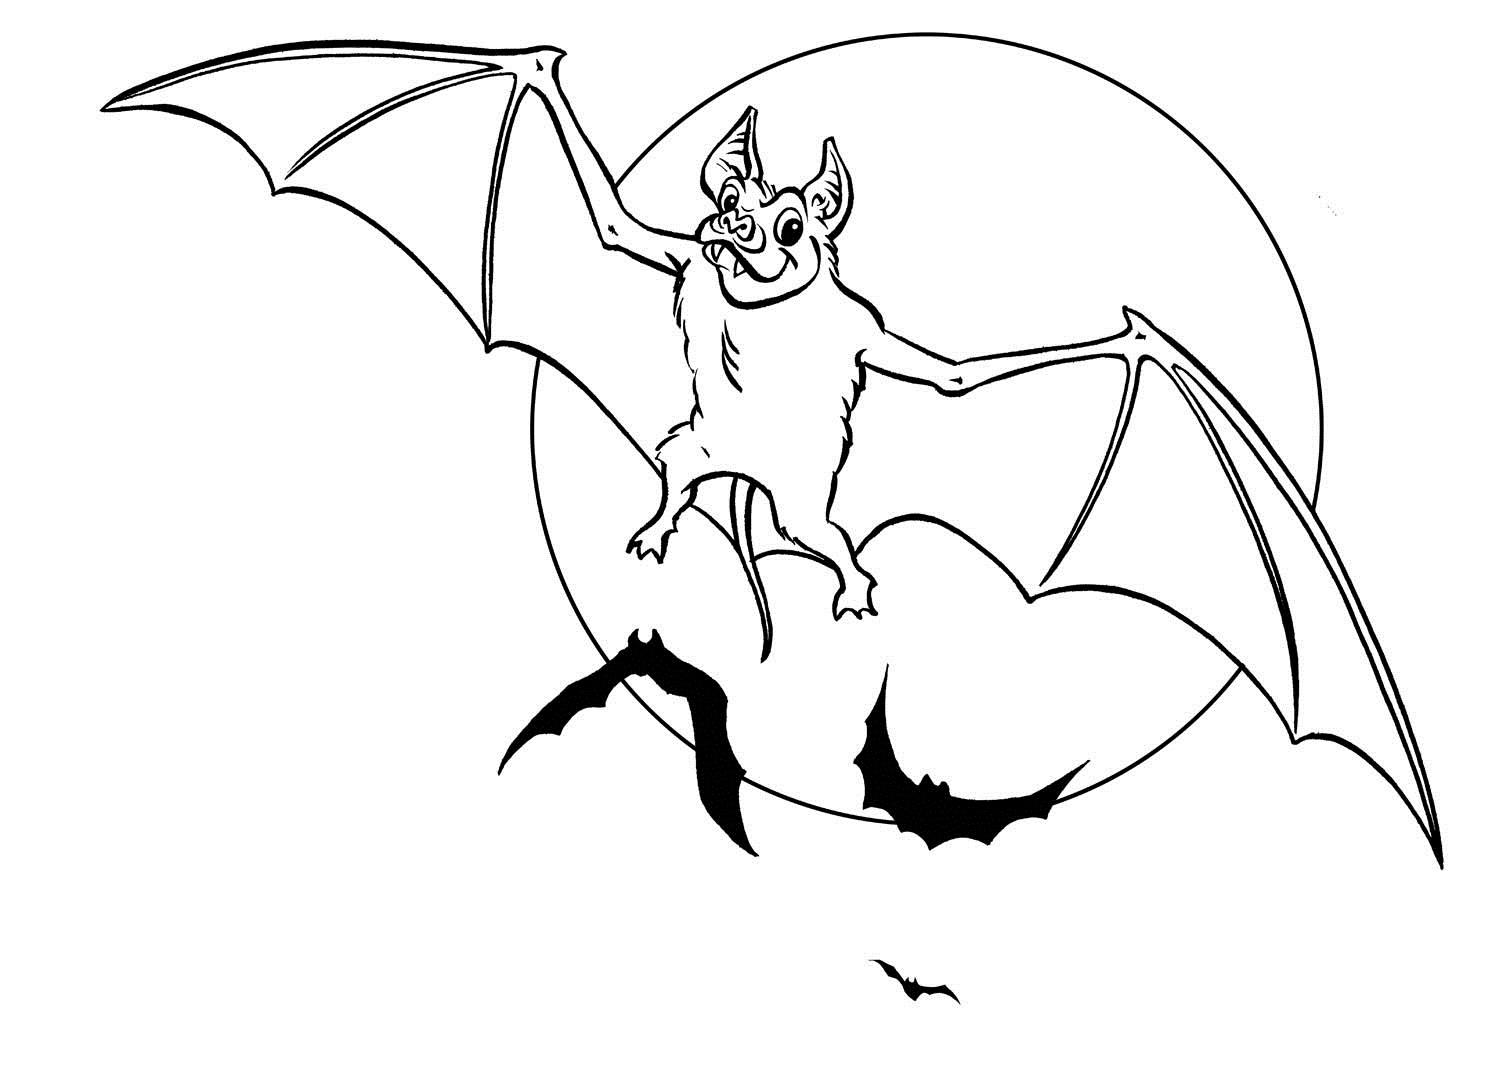 Bat Coloring Page For Us To Make Coloring